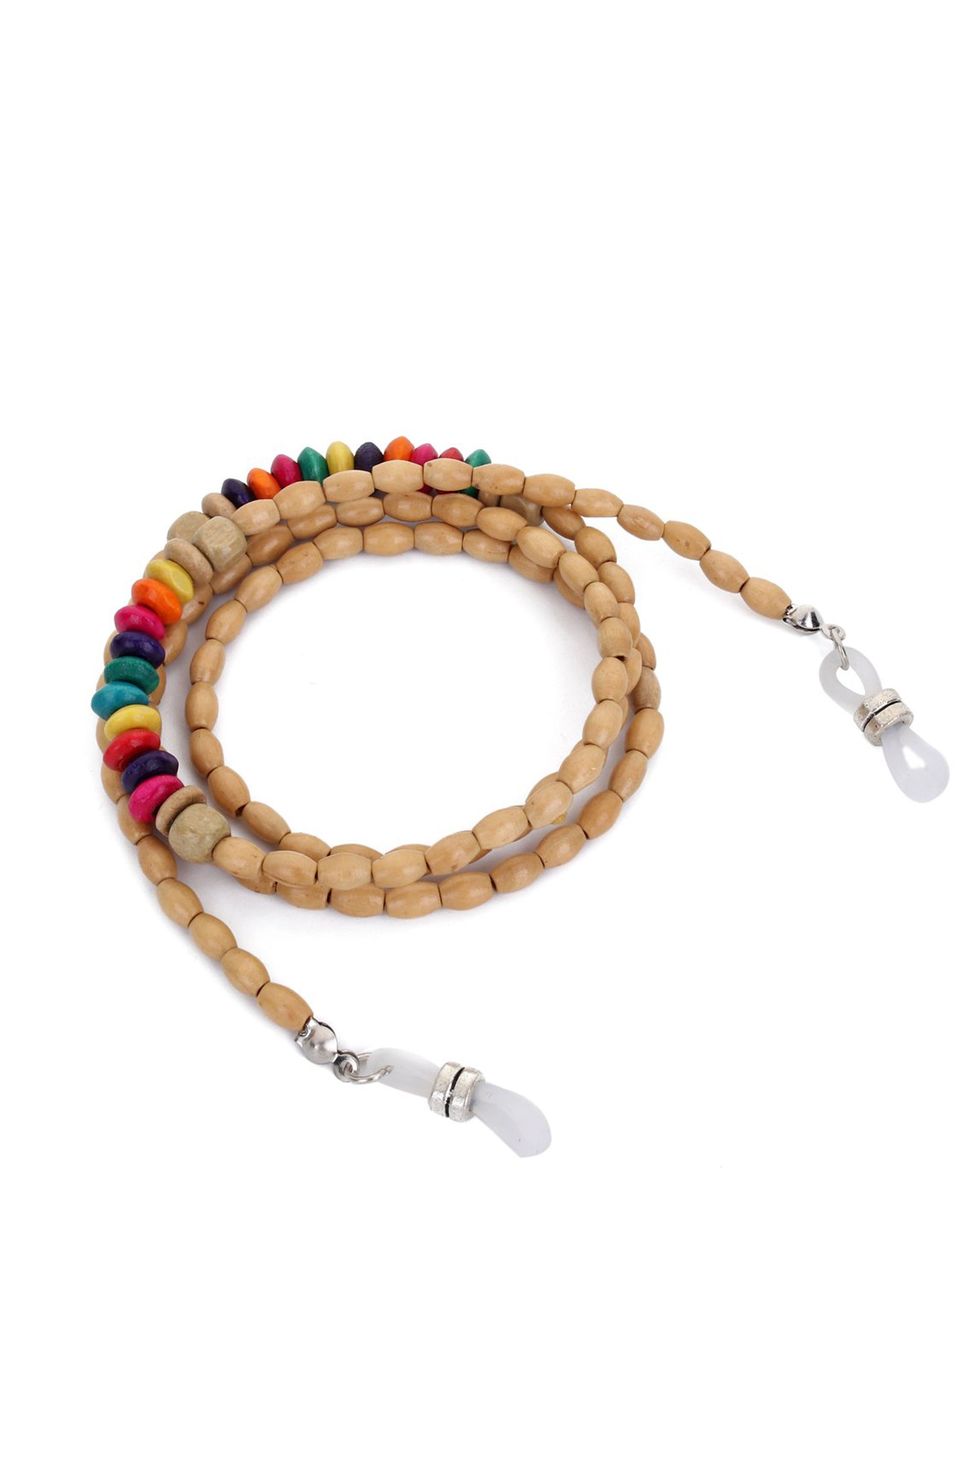 Sunglasses Wooden Beads Strap